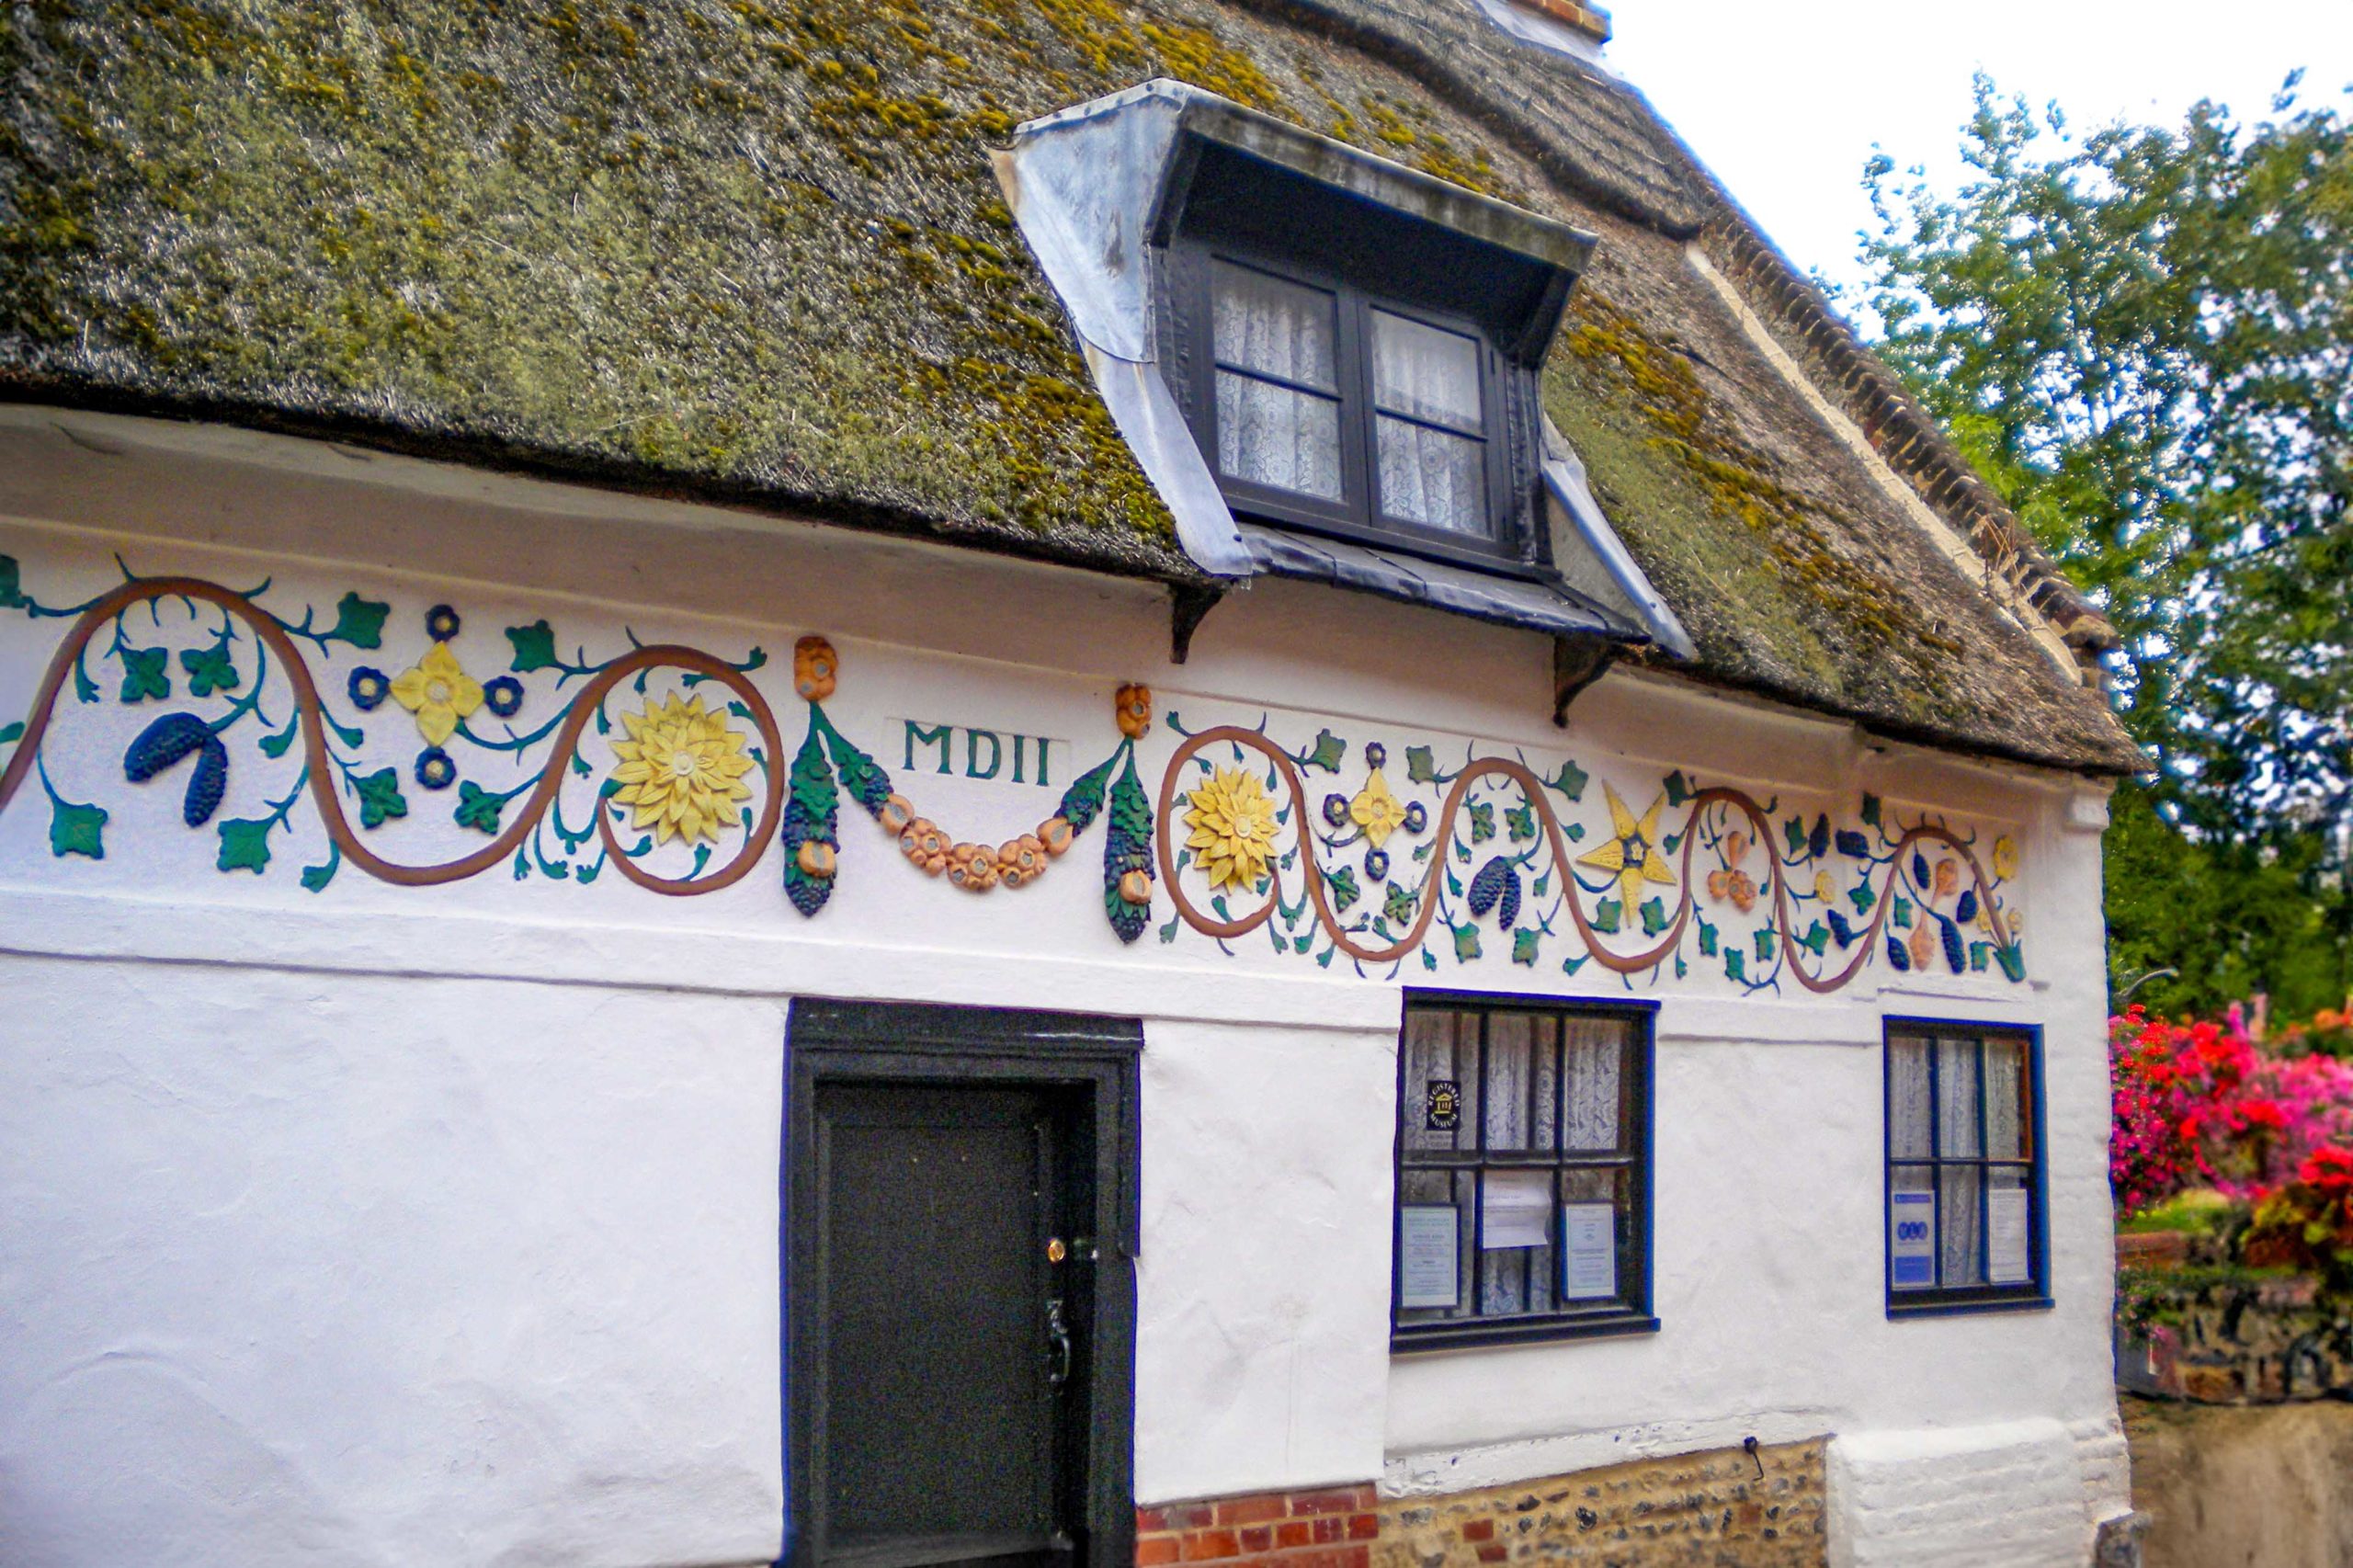 Cottages anglais - Bishop Bonner's Cottage Dereham Norfolk. Photo by Charlesdrakew [Public Domain via Wikimedia Commons]